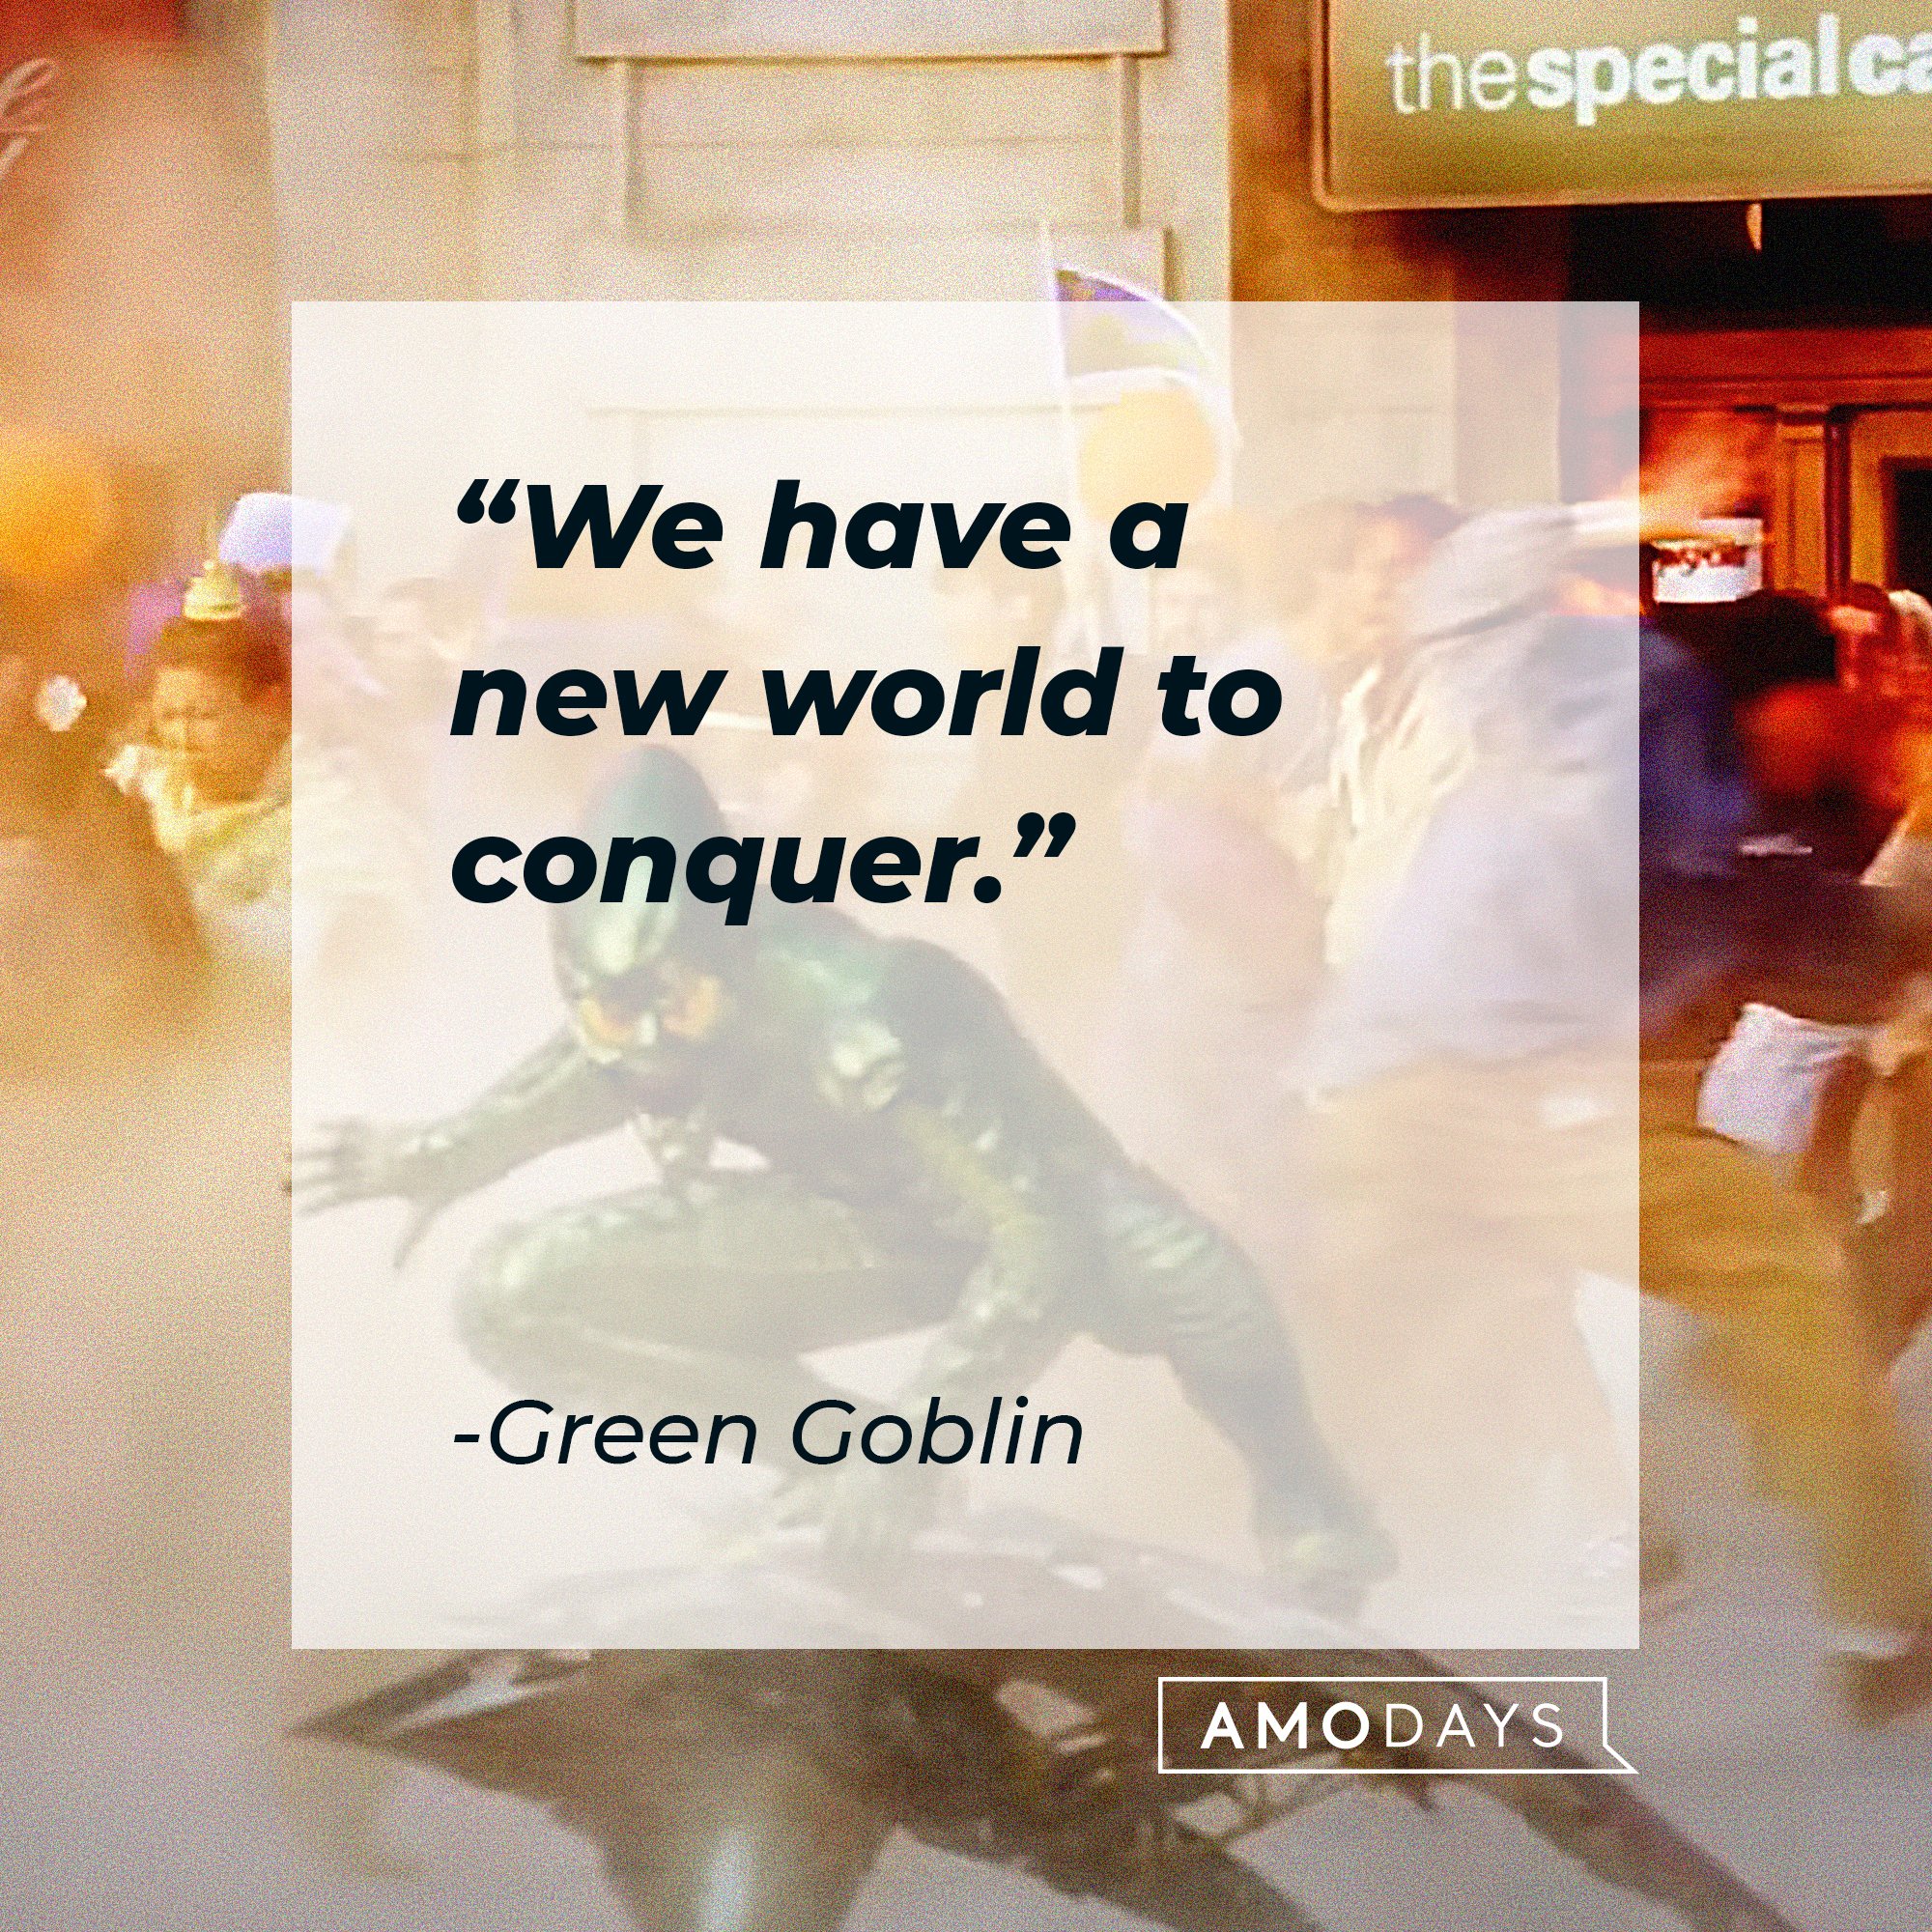 Norman Osborn's quote: "We have a new world to conquer. " | Image: AmoDays